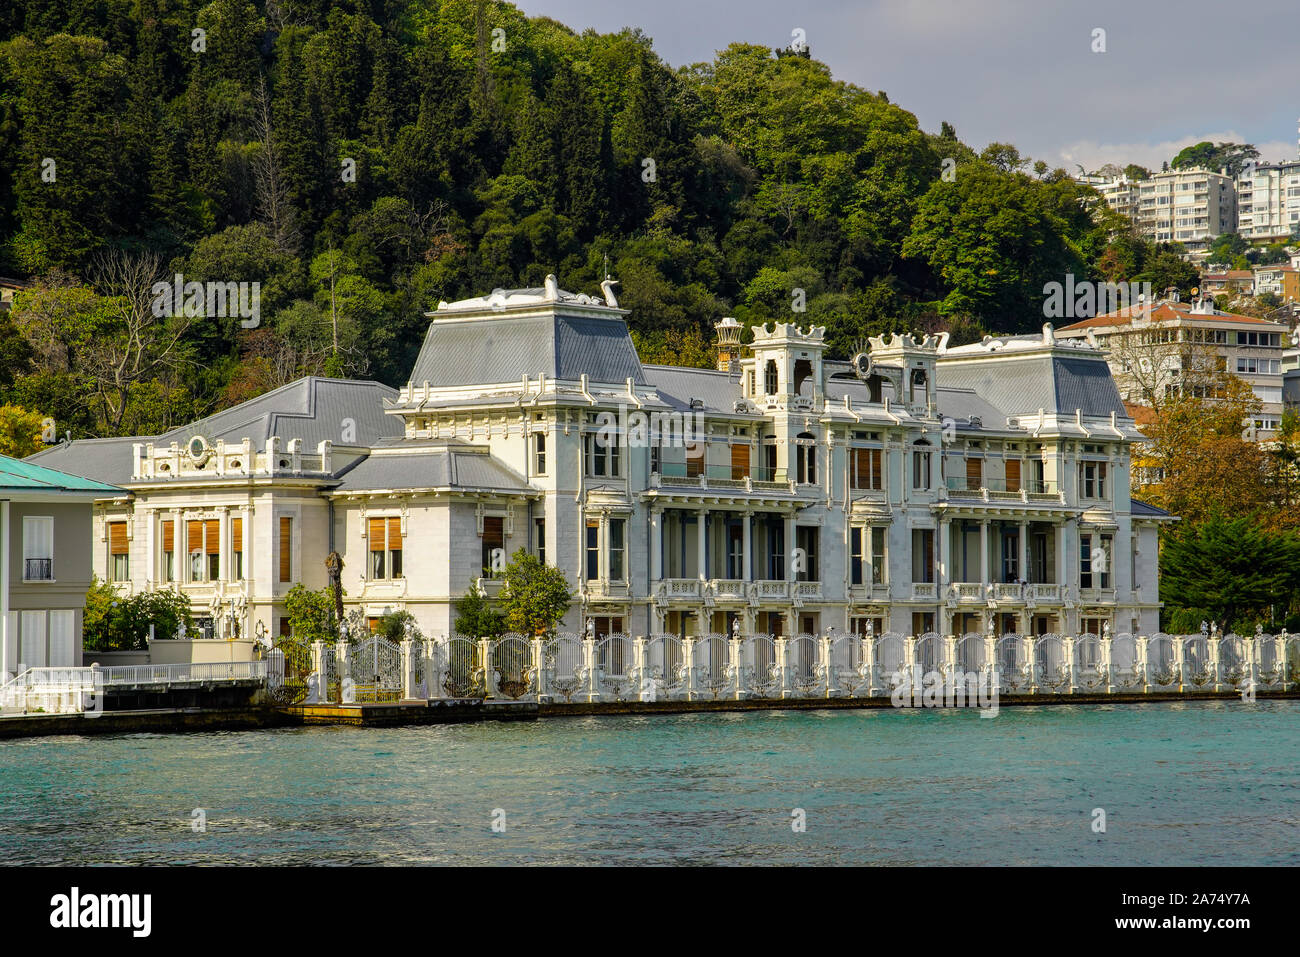 The Ismail Pasha Yali in Bebek, General Consulate of Arab Republic of Egypt, Istanbul, Turkey. Stock Photo